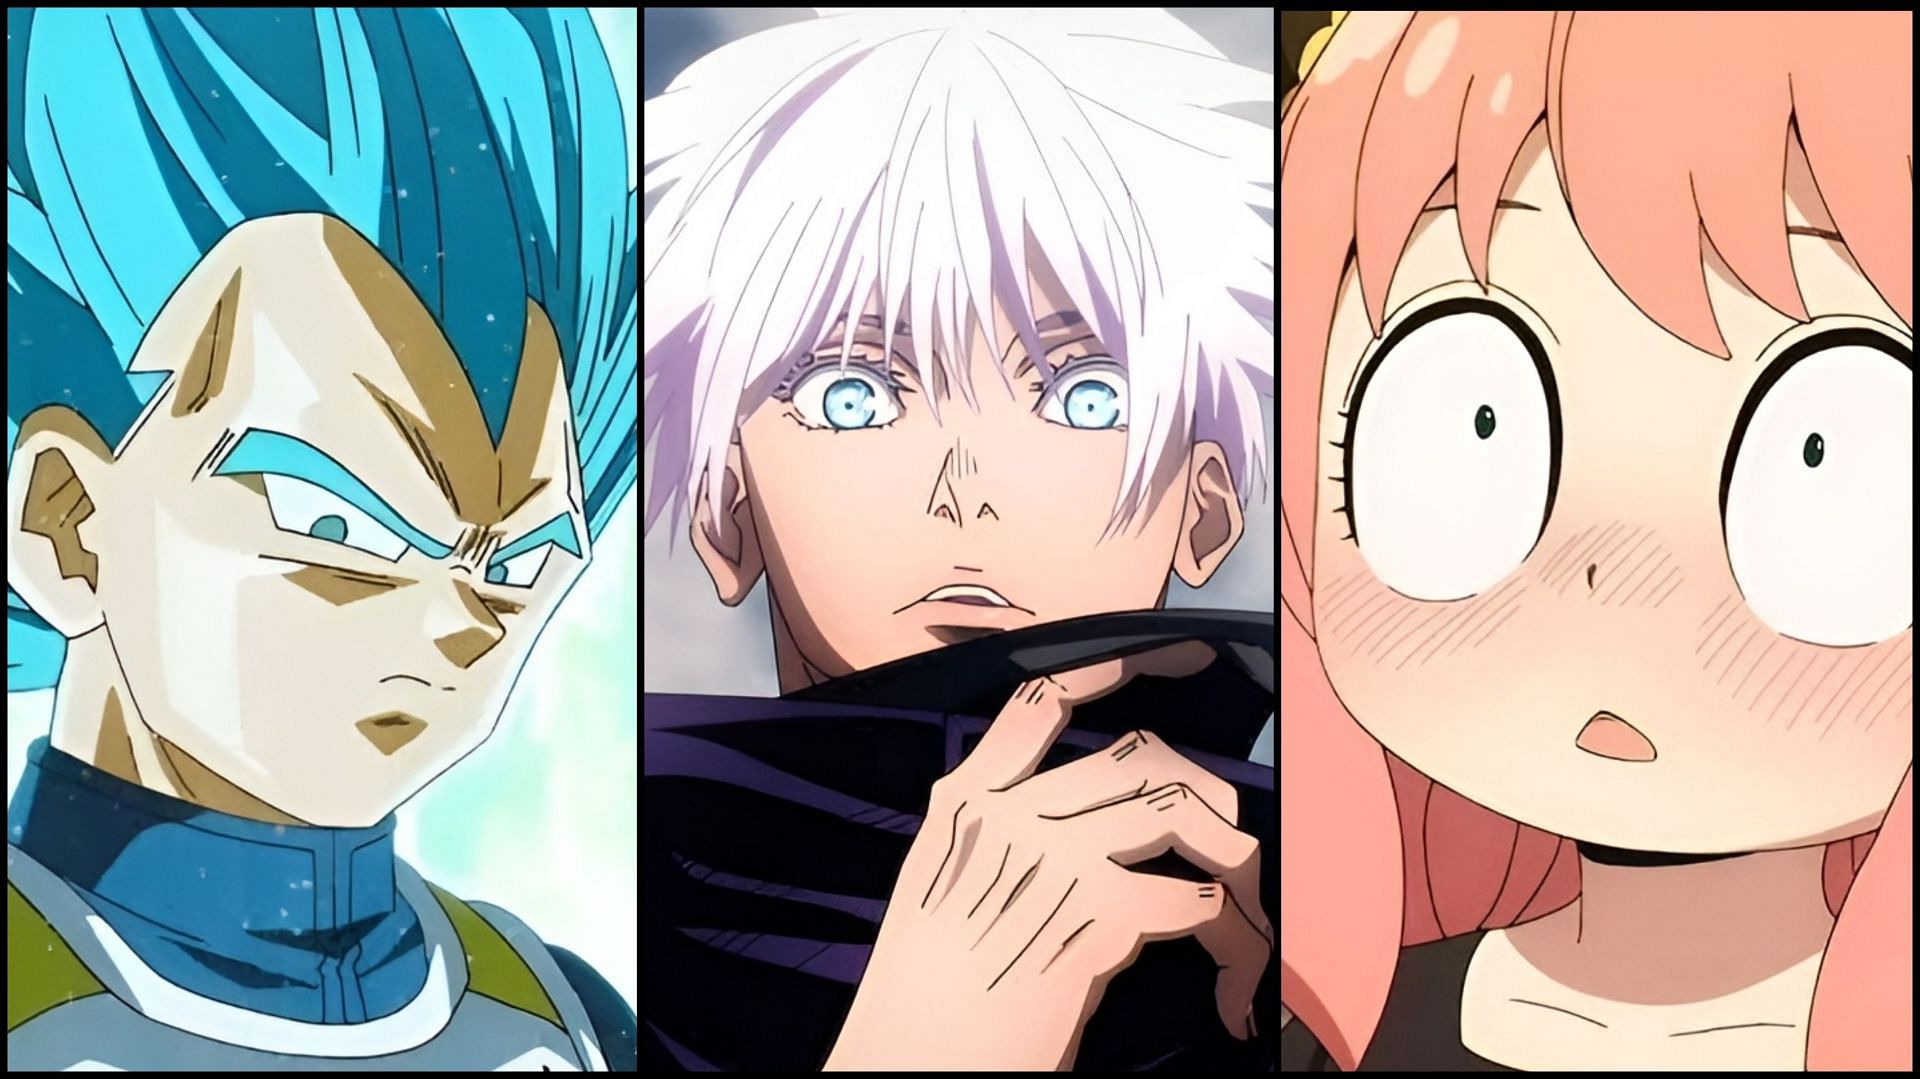 10 anime characters disliked by their creators